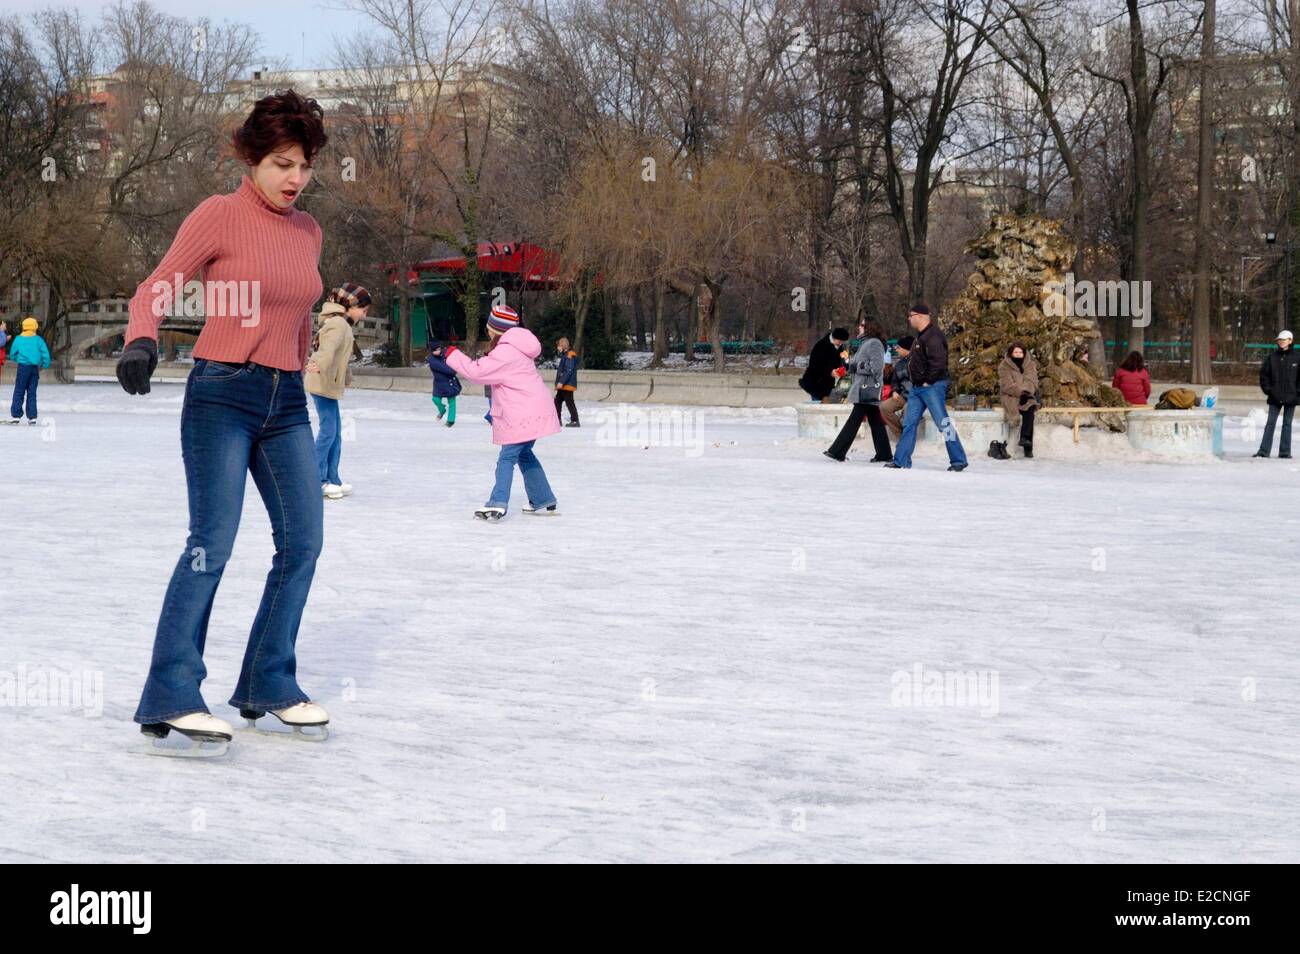 Romania Muntenia Bucharest lake and park Cismigiu natural ice rink young woman in red pull over skating on the frozen lake Stock Photo